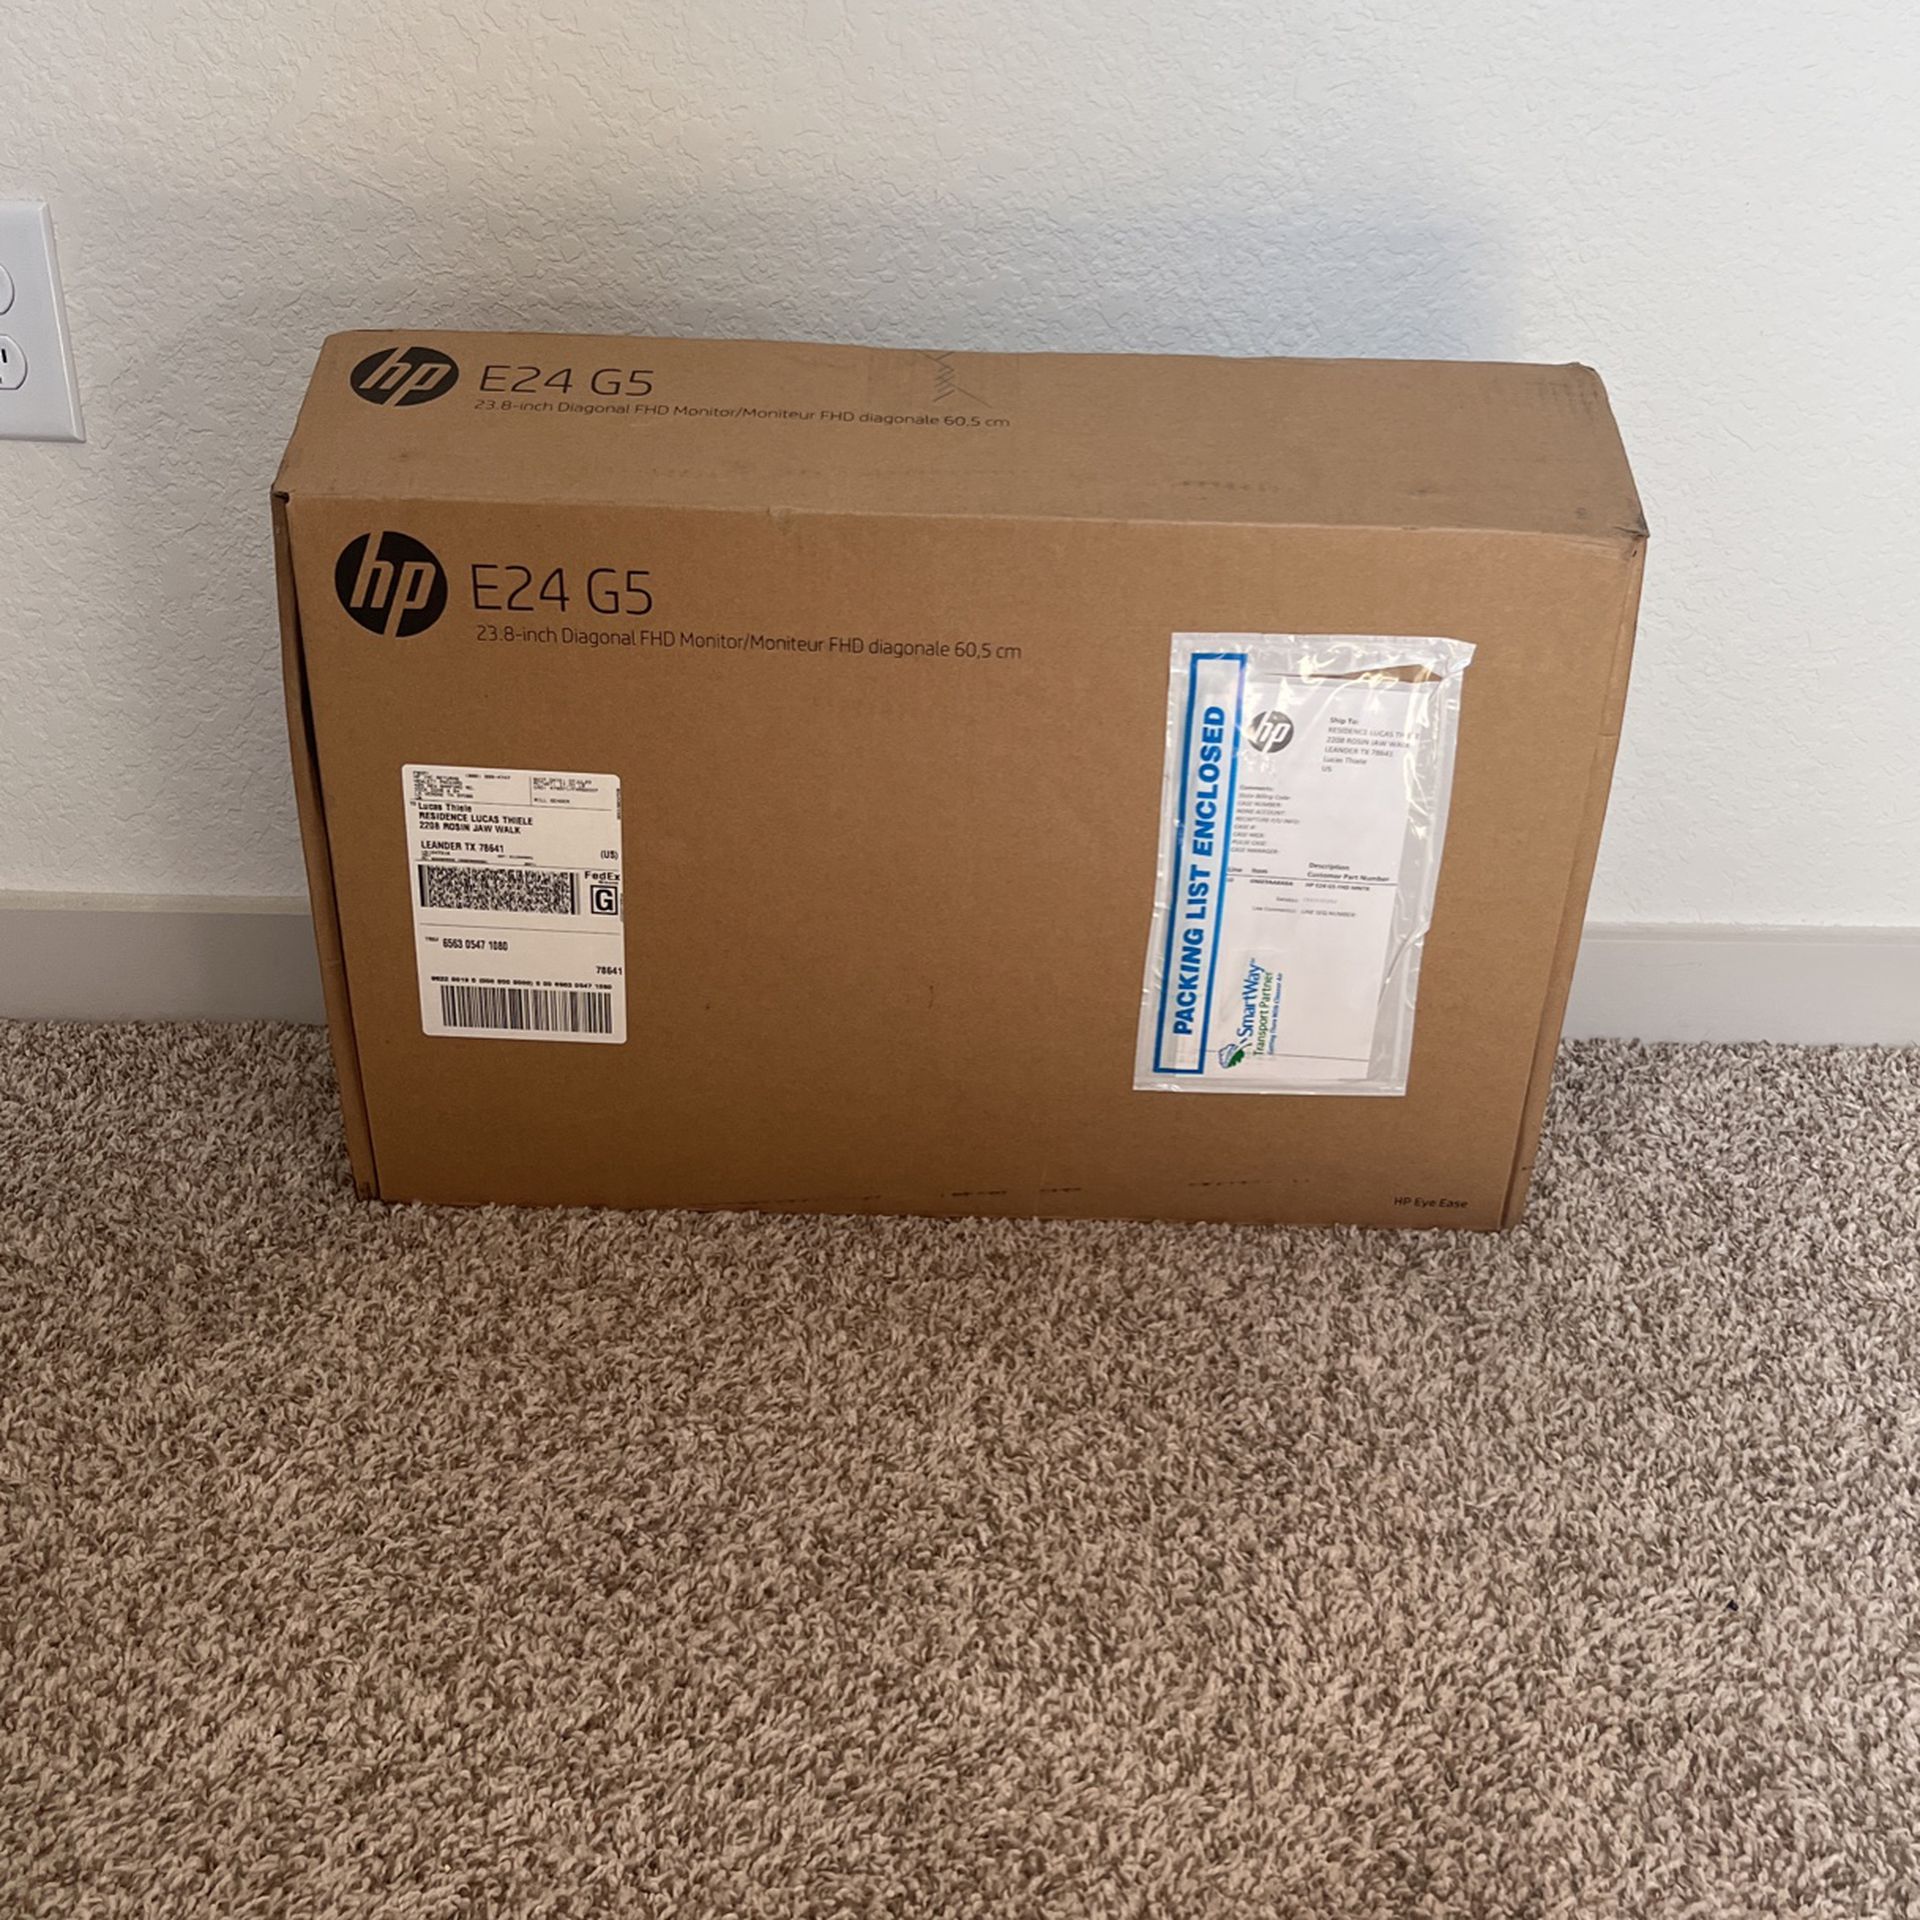 HP E24 G5 Monitor for Sale in Leander, TX - OfferUp